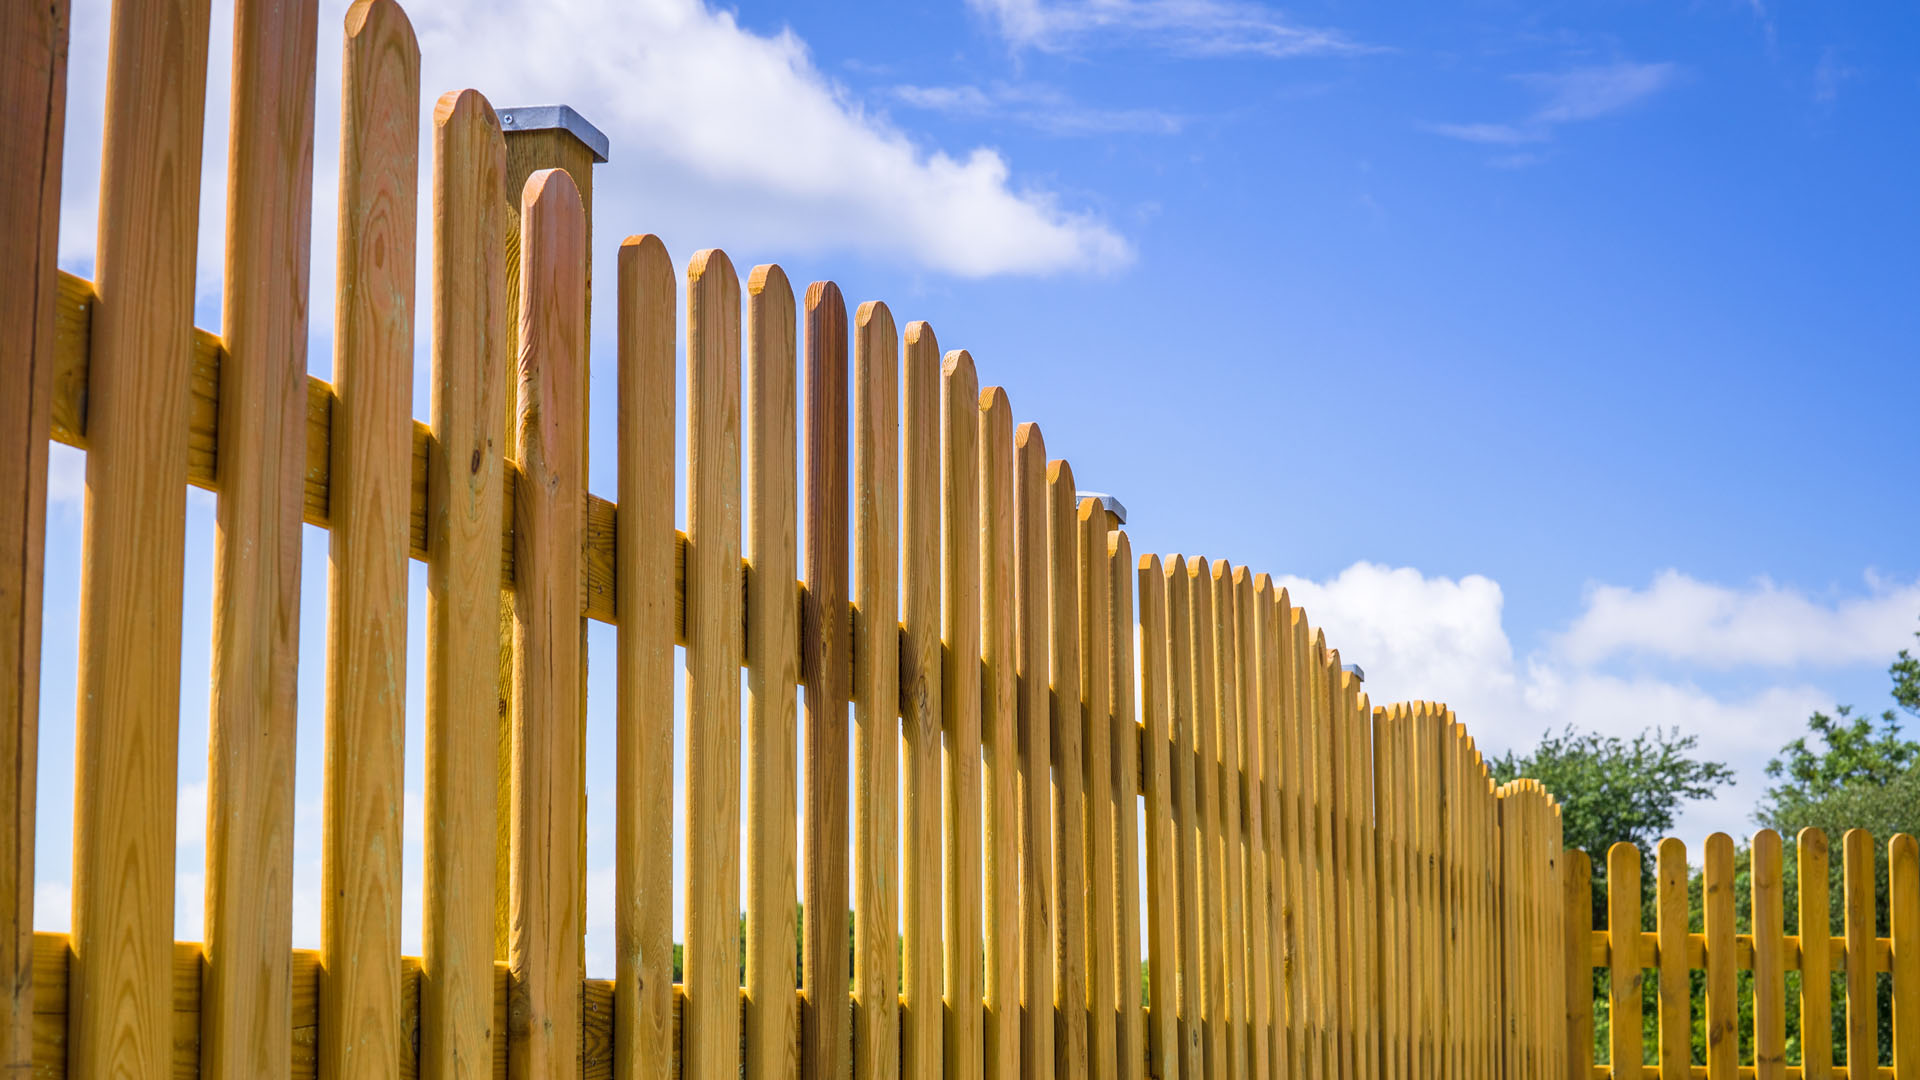 LET US RESTORE YOUR FENCE IN DAYTONA BEACH!